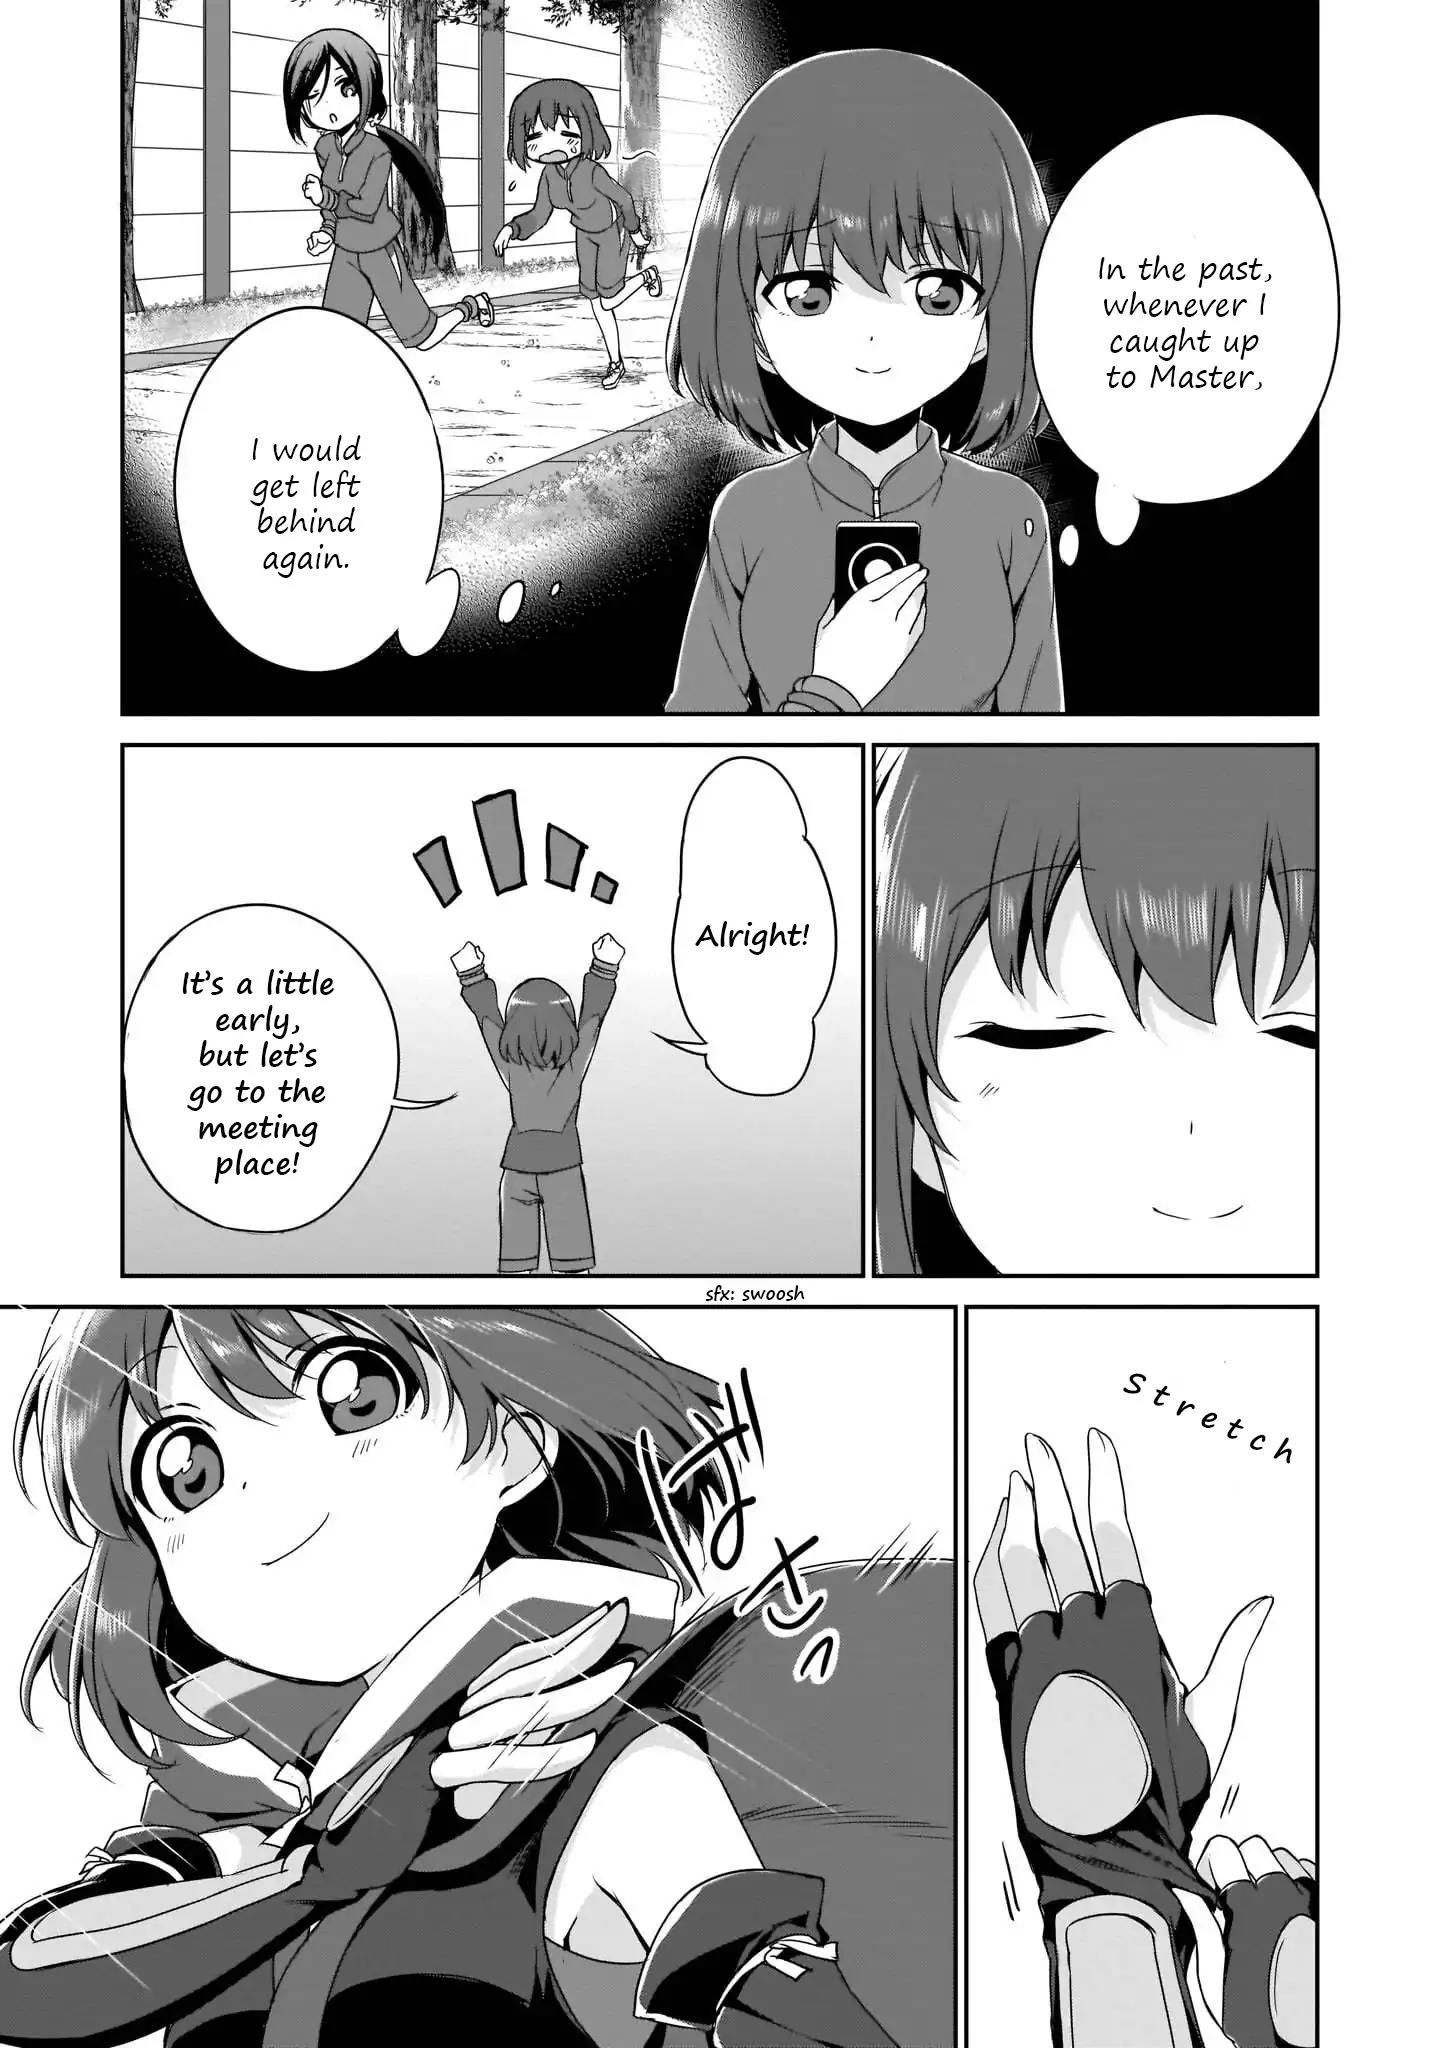 Release the Spyce - Secret Mission Chapter 10: